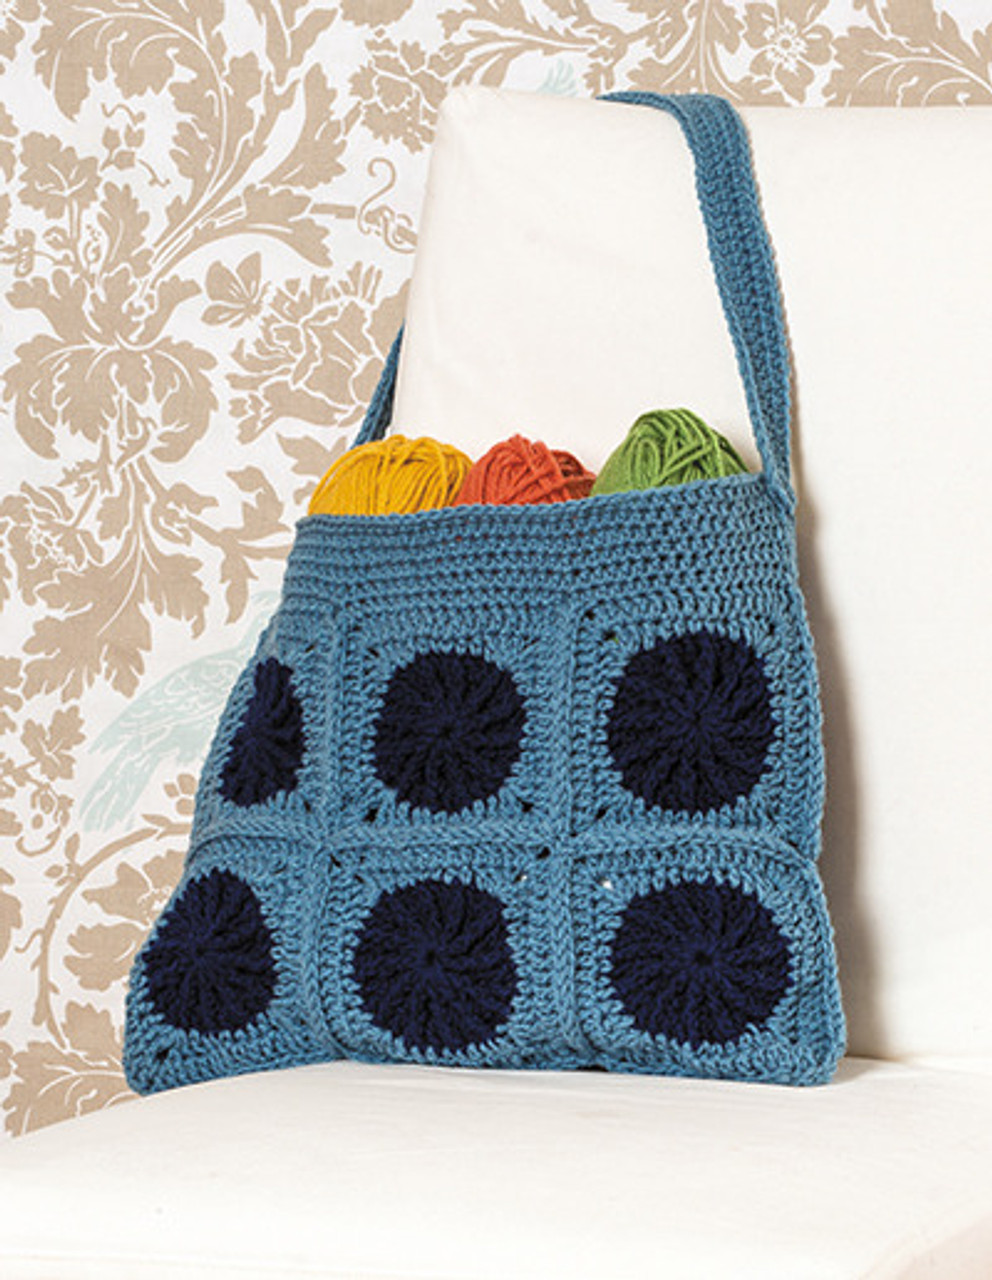 Leisure Arts Learn to Crochet Circles Into Squares